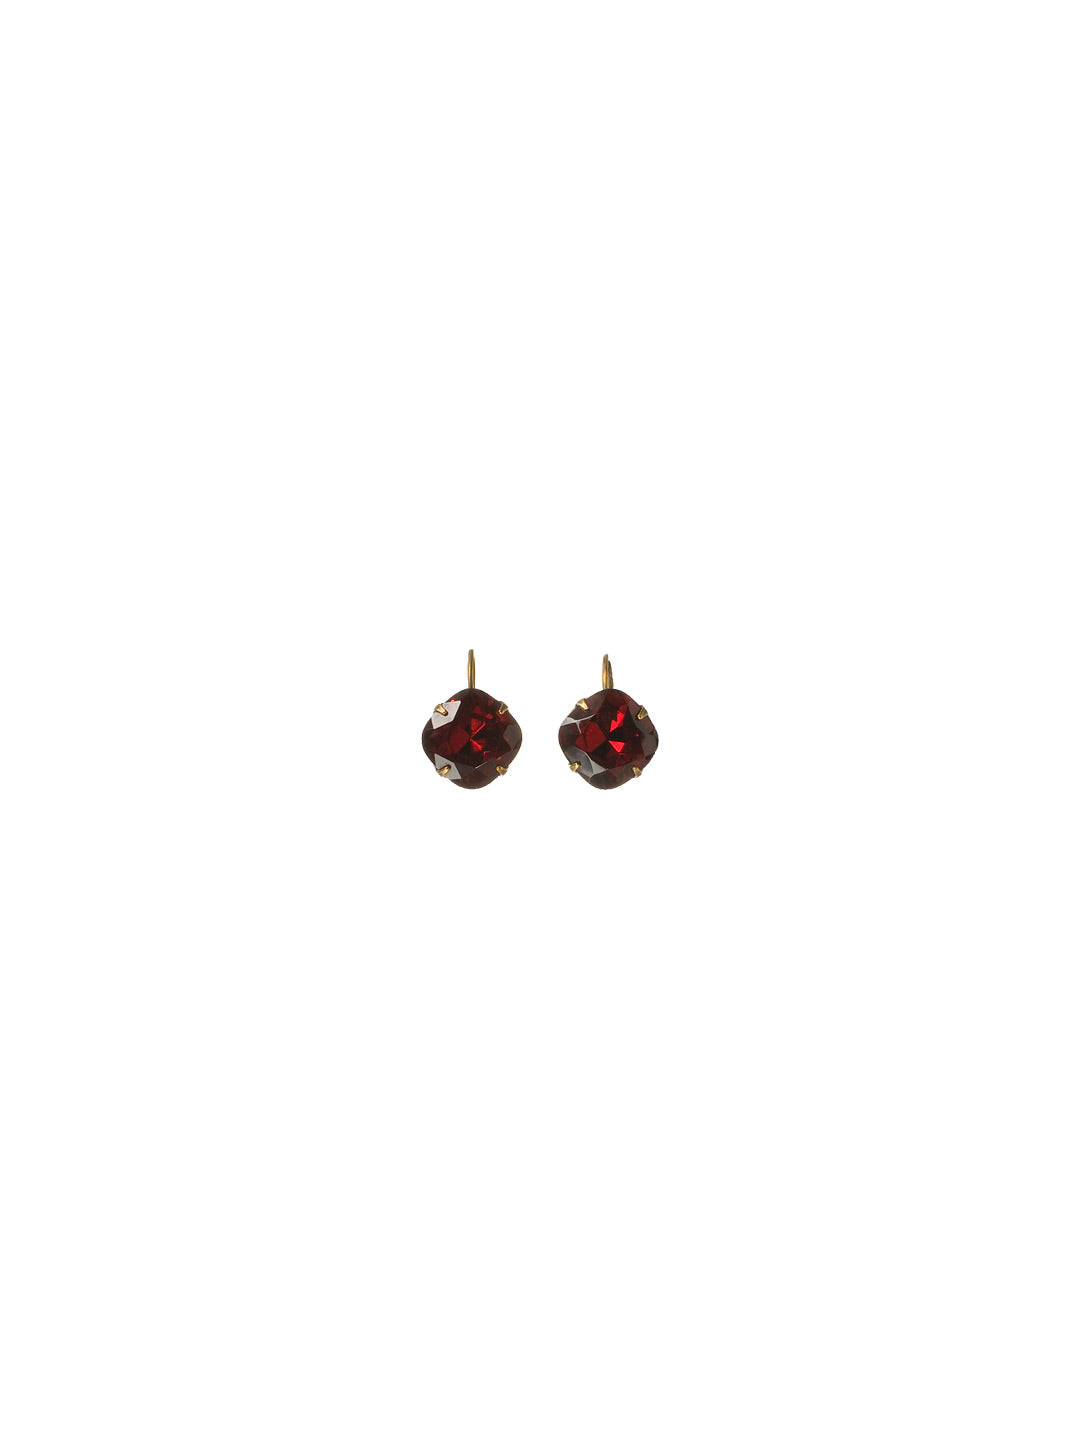 Single Drop Crystal Dangle Earrings - EBA12AGCB - Sleek and simple, these single crystal, cushion-cut drop earrings will dazzle. From Sorrelli's Cranberry collection in our Antique Gold-tone finish.